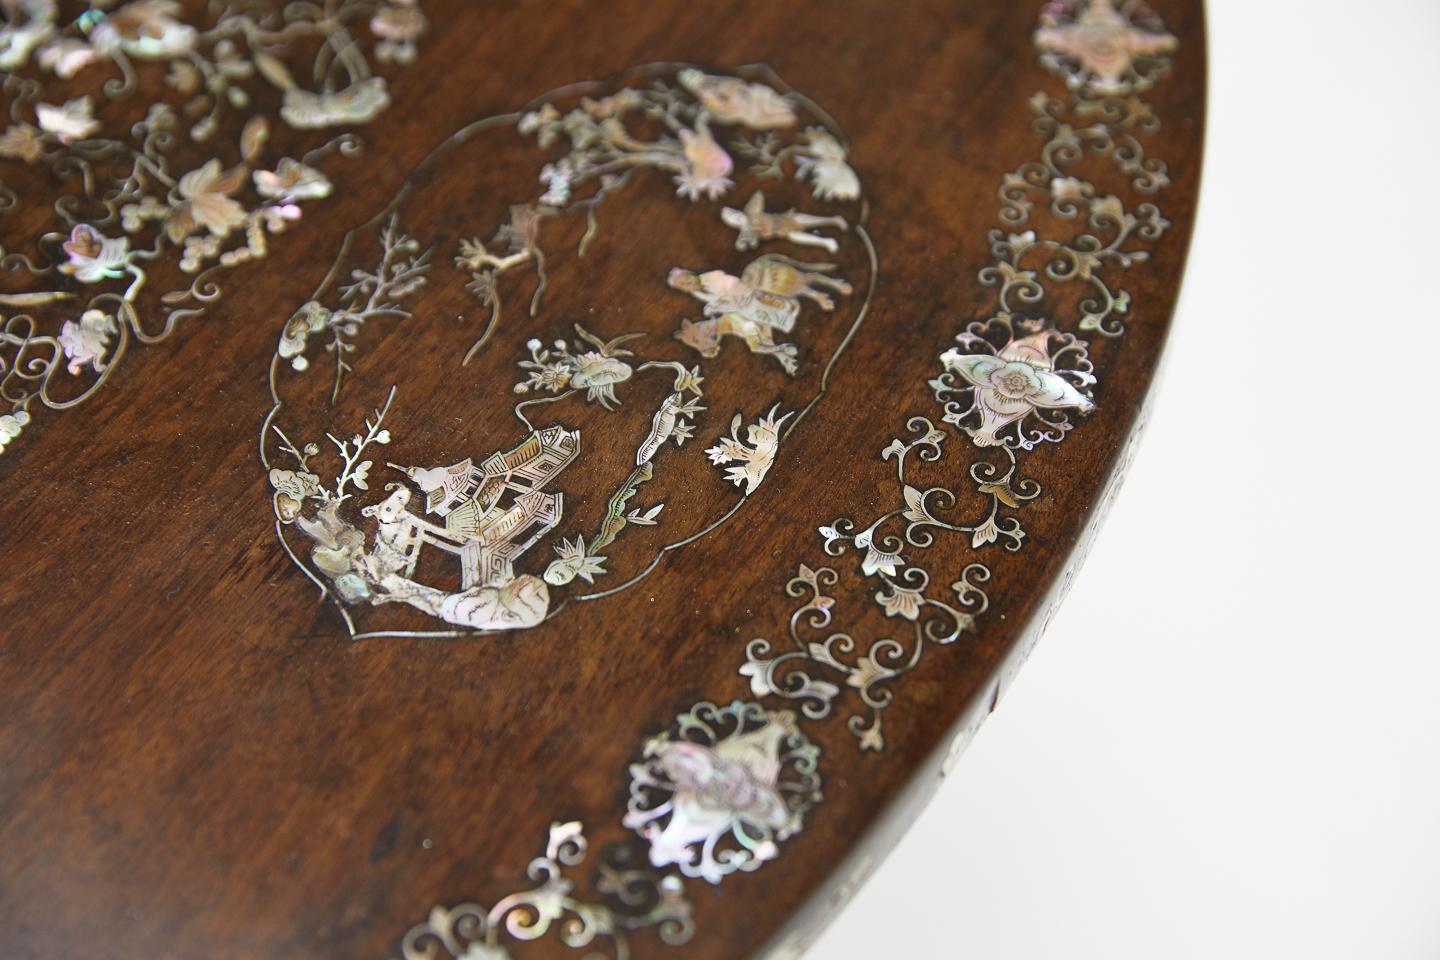 Good sized, 19th century Chinese mother of pearl inlaid table, beautifully decorated.